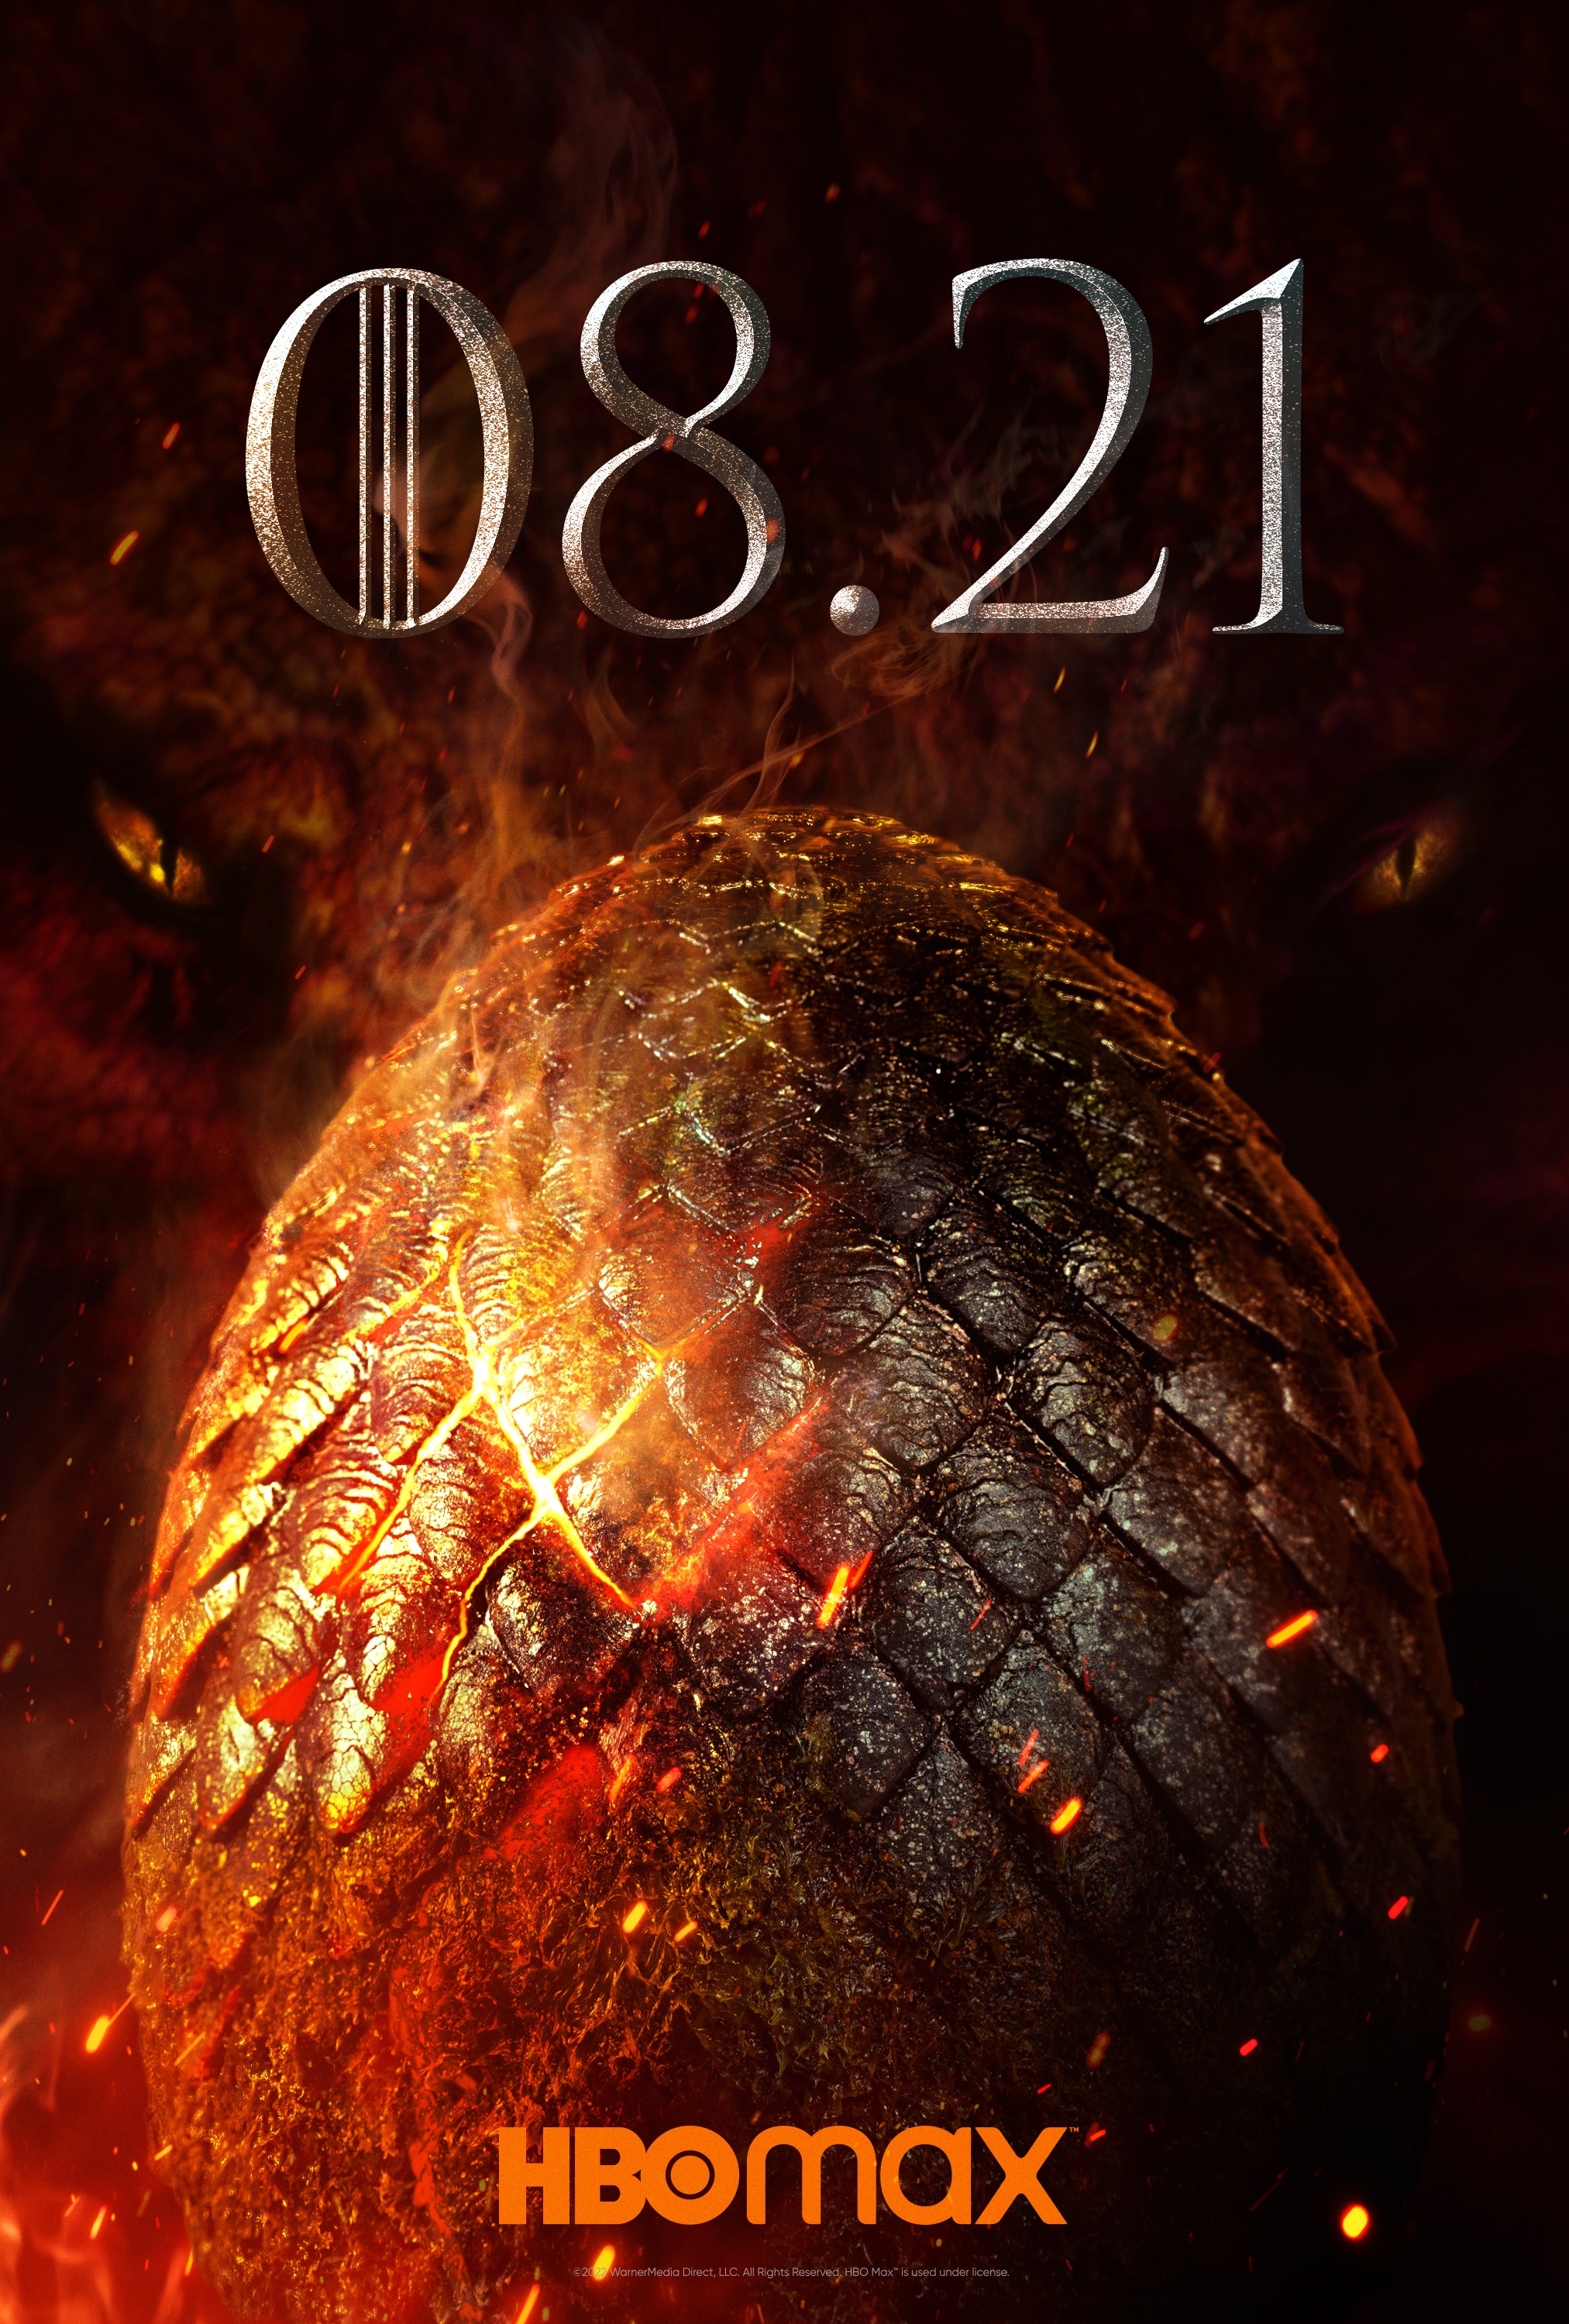 House of the Dragon on X: The age of dragons is here. August 21 on  @HBOMax. #HouseoftheDragon  / X